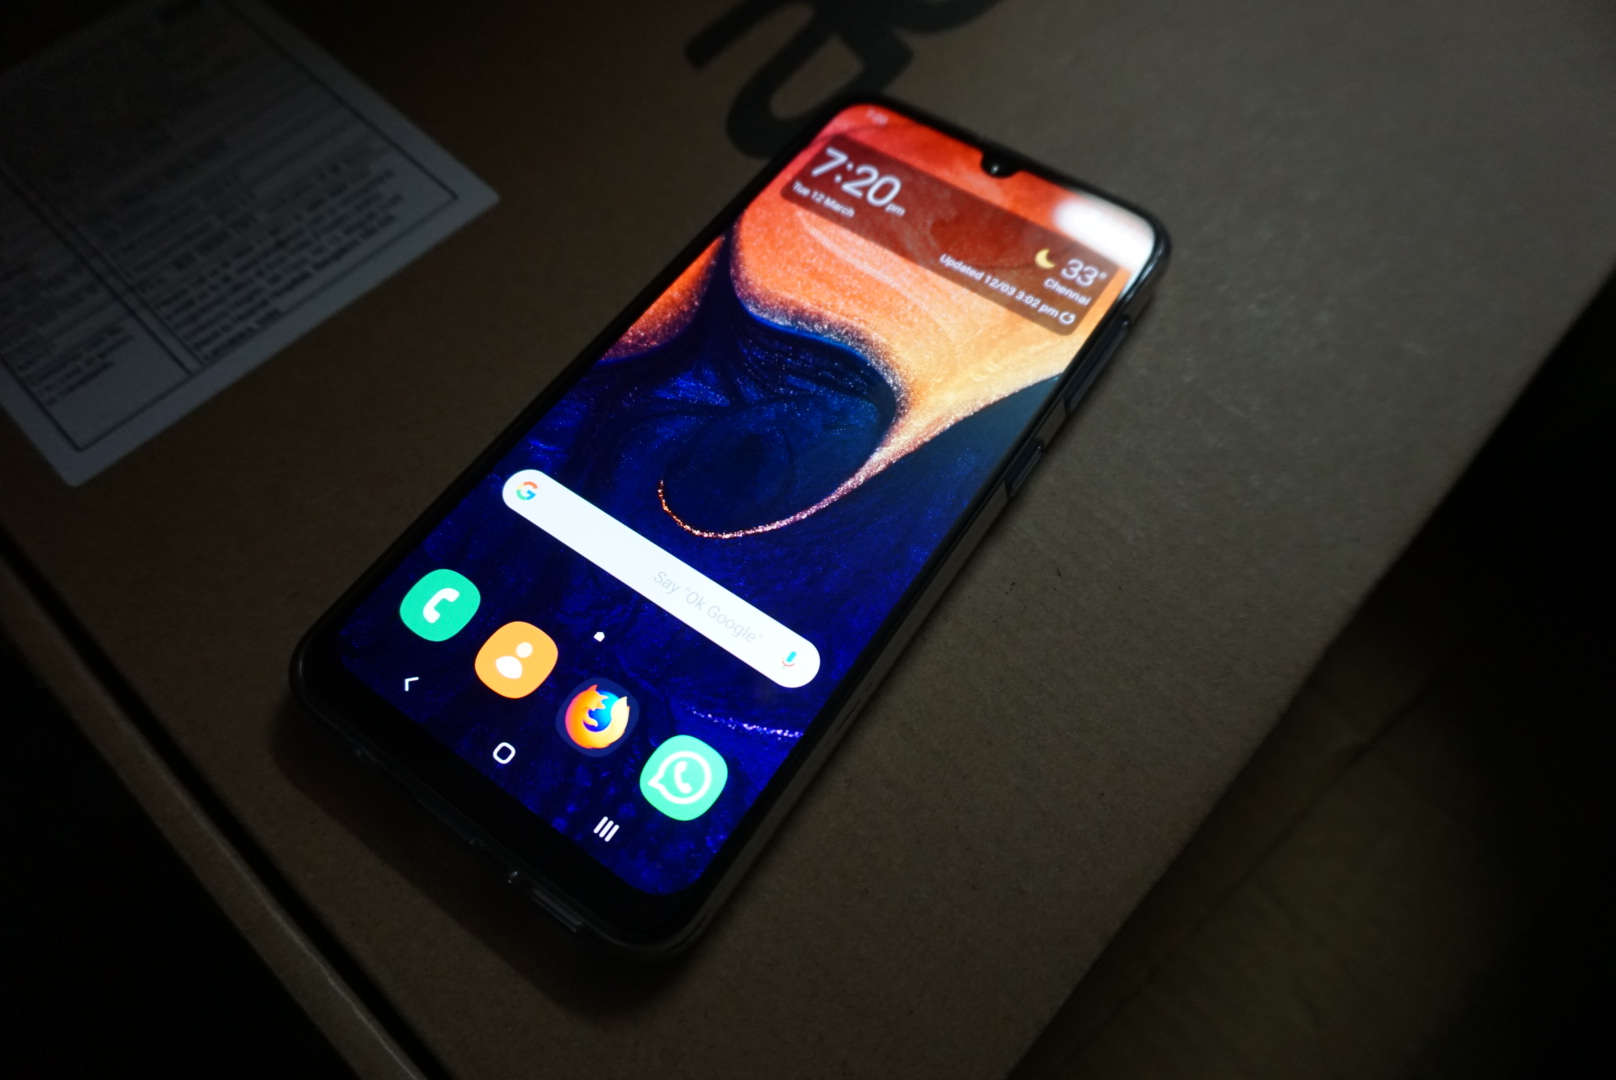 Samsung Galaxy A50 Android 10 update under testing, stable version may roll out ahead of schedule